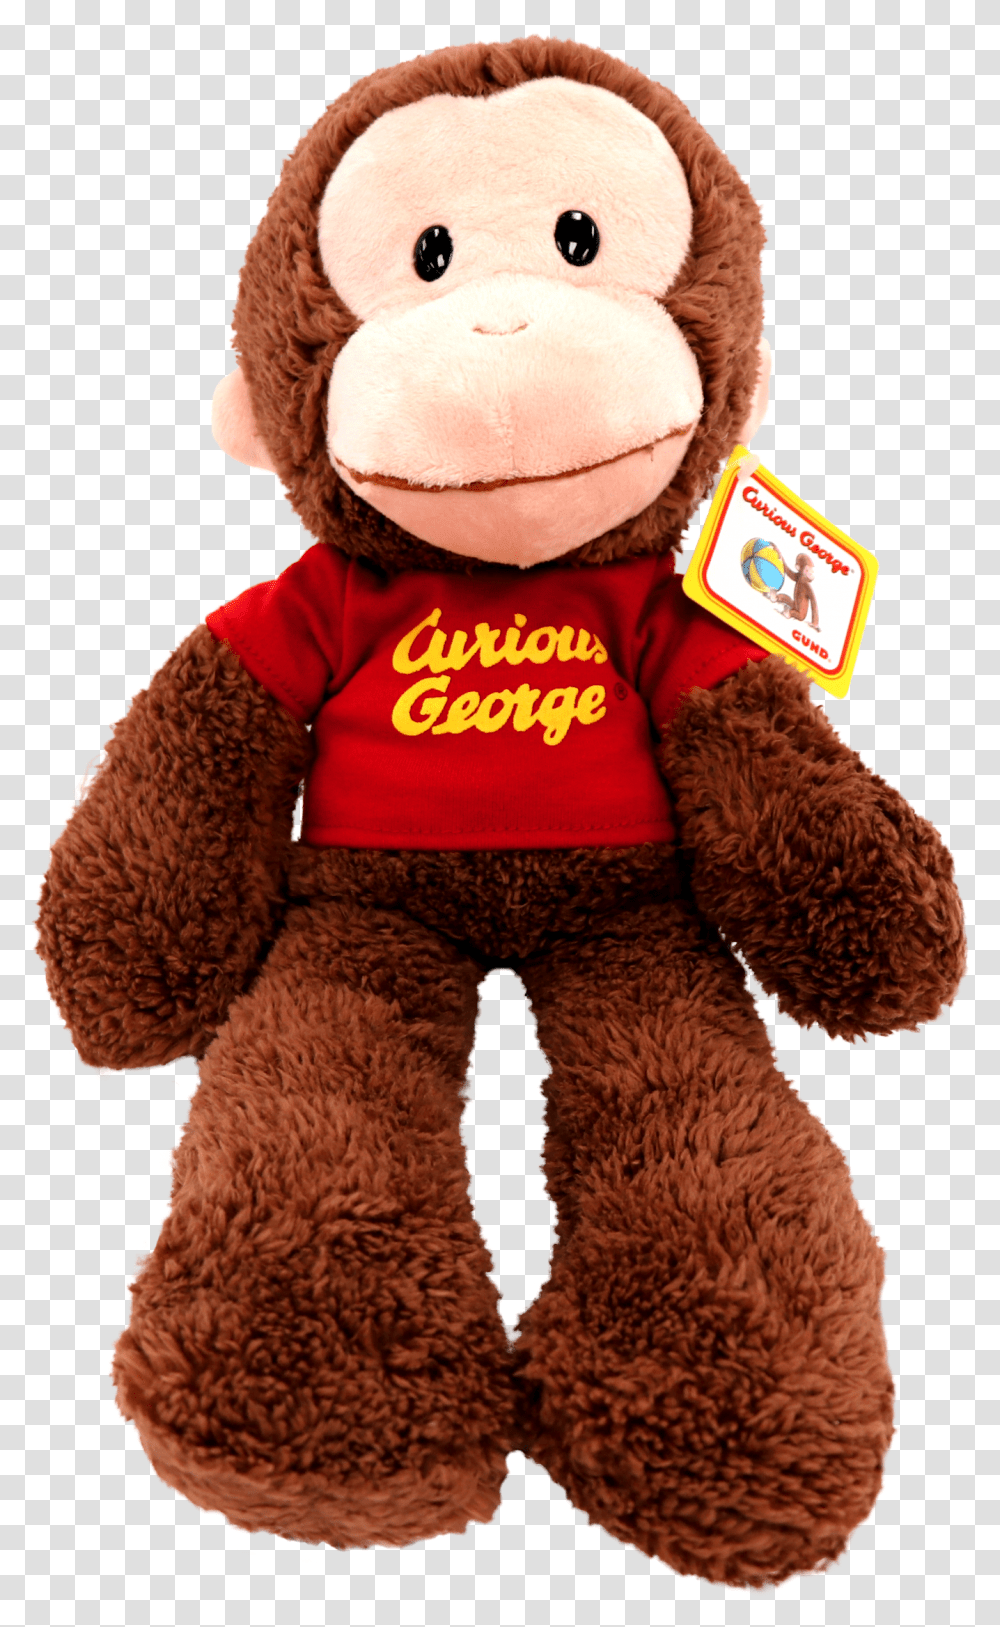 Curious George, Plush, Toy, Teddy Bear Transparent Png